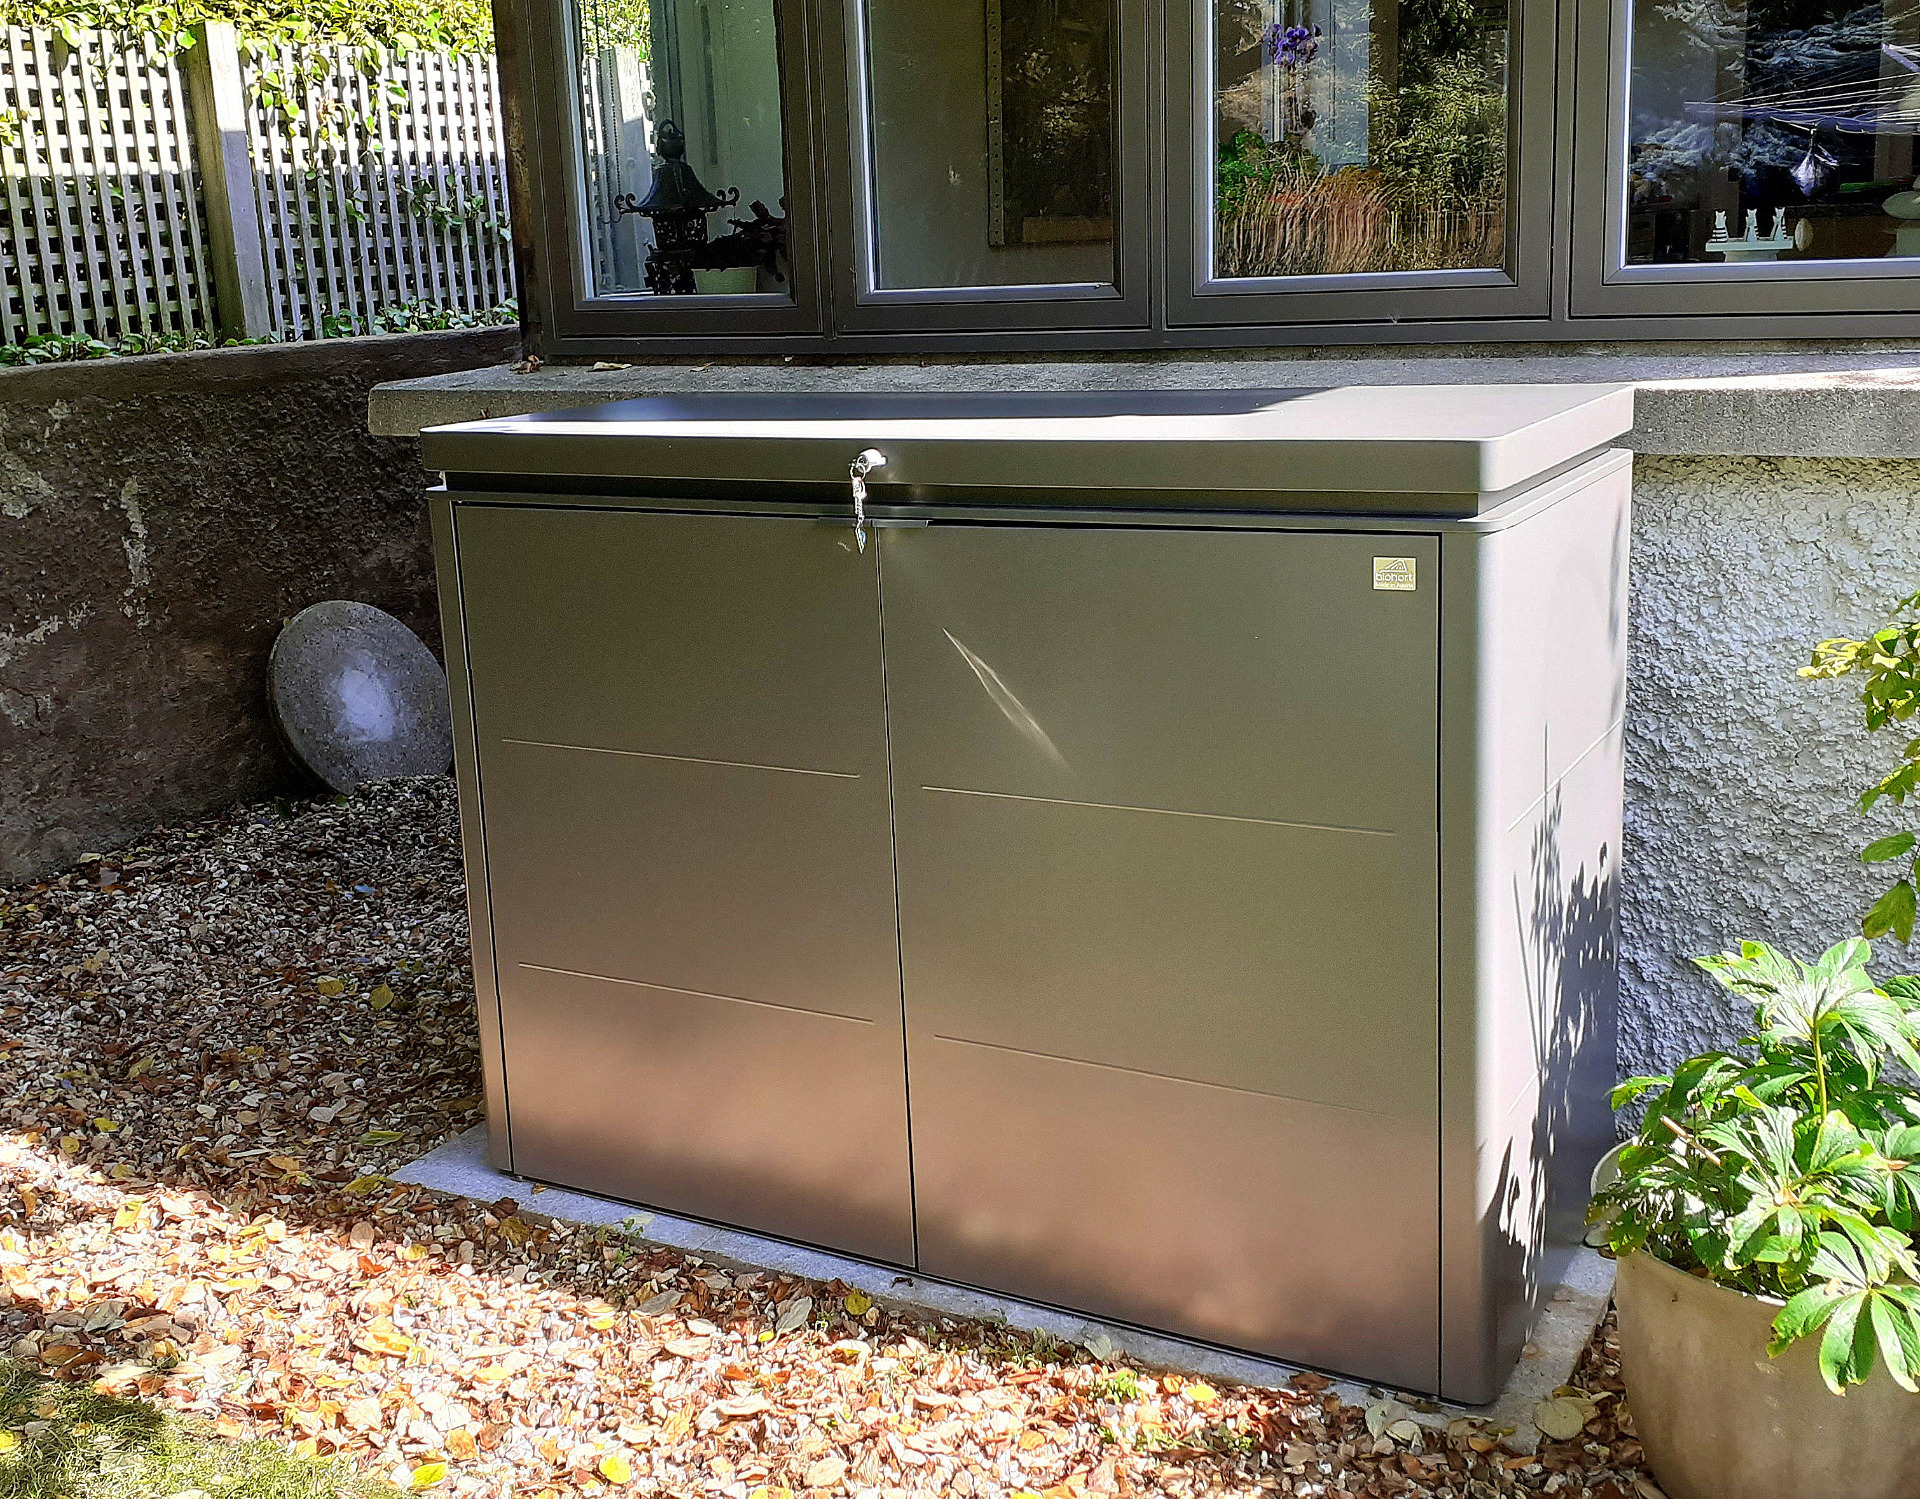 Biohort HighBoard 160 Garden Storage Unit | Supplied + Fitted in Glenageary, Co Dublin | Competitive Prices with FREE installation from Owen Chubb Landscapes Ltd, Tel 087-2306128